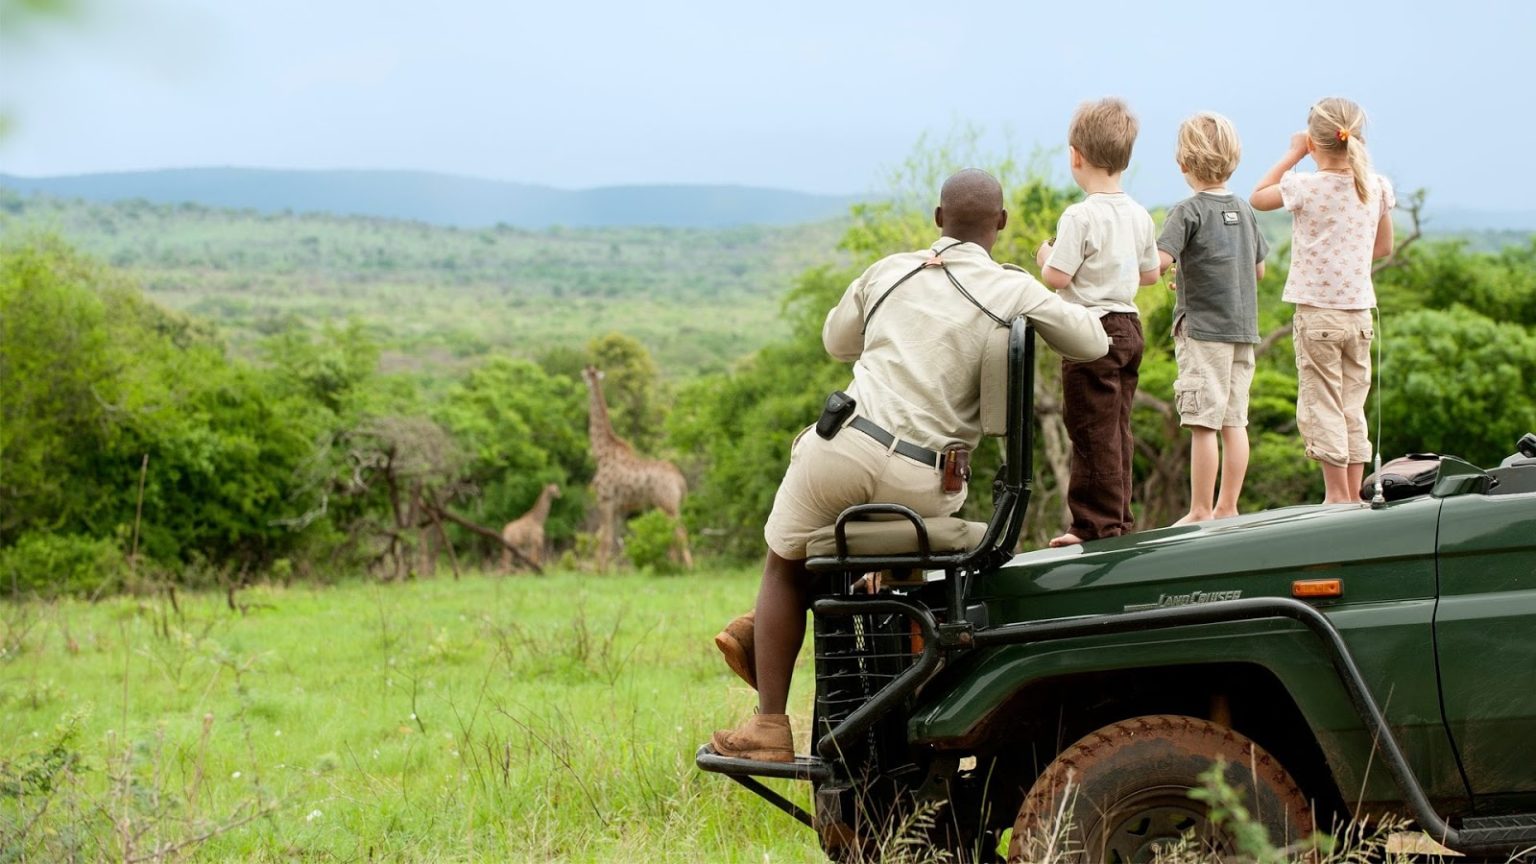 beside their South Africa safari guide, three small children stand atop the hood of a safari vehicle in a green field, watching giraffes